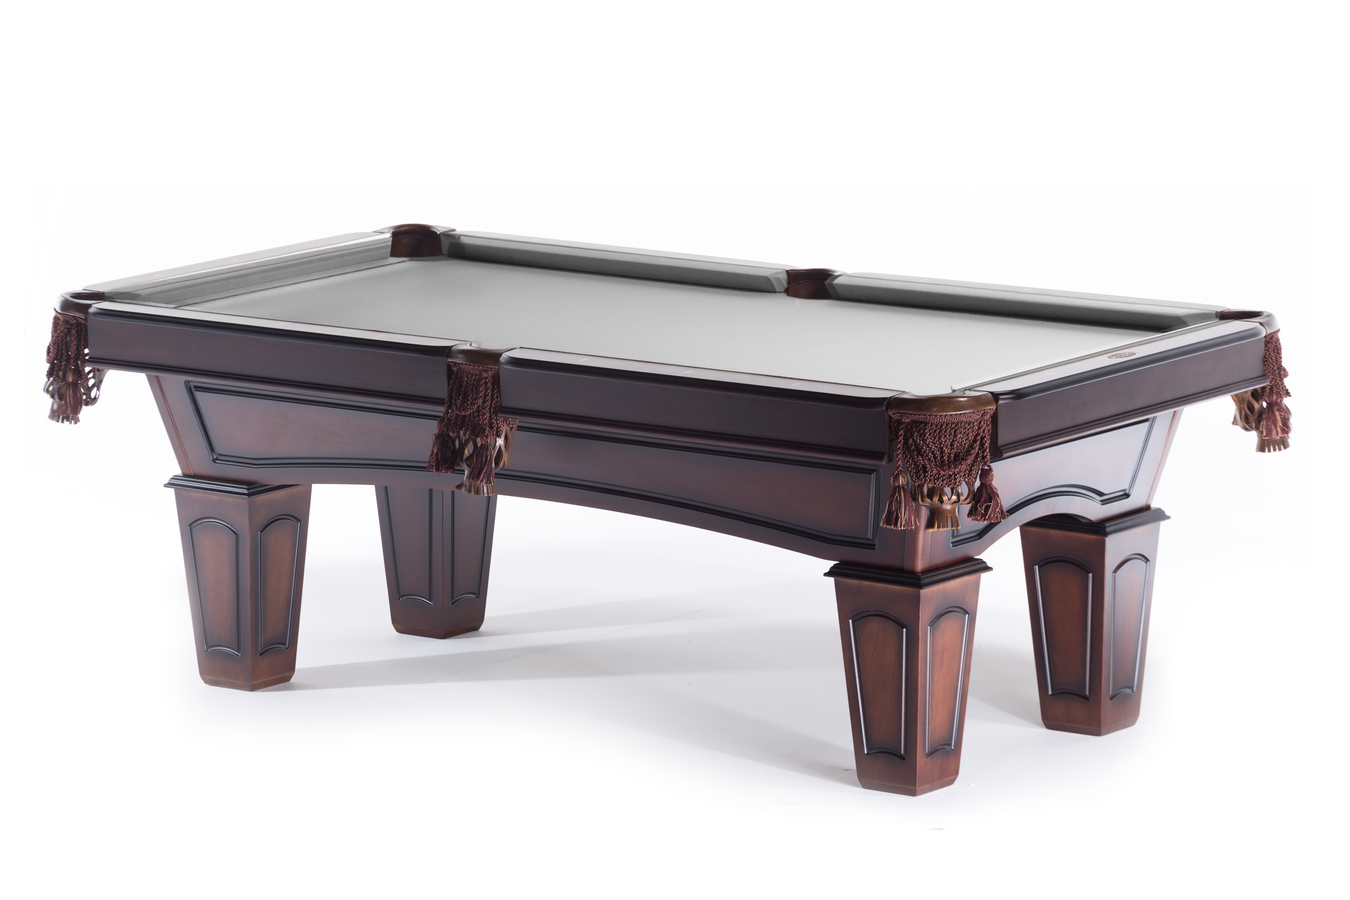 All Pool Tables